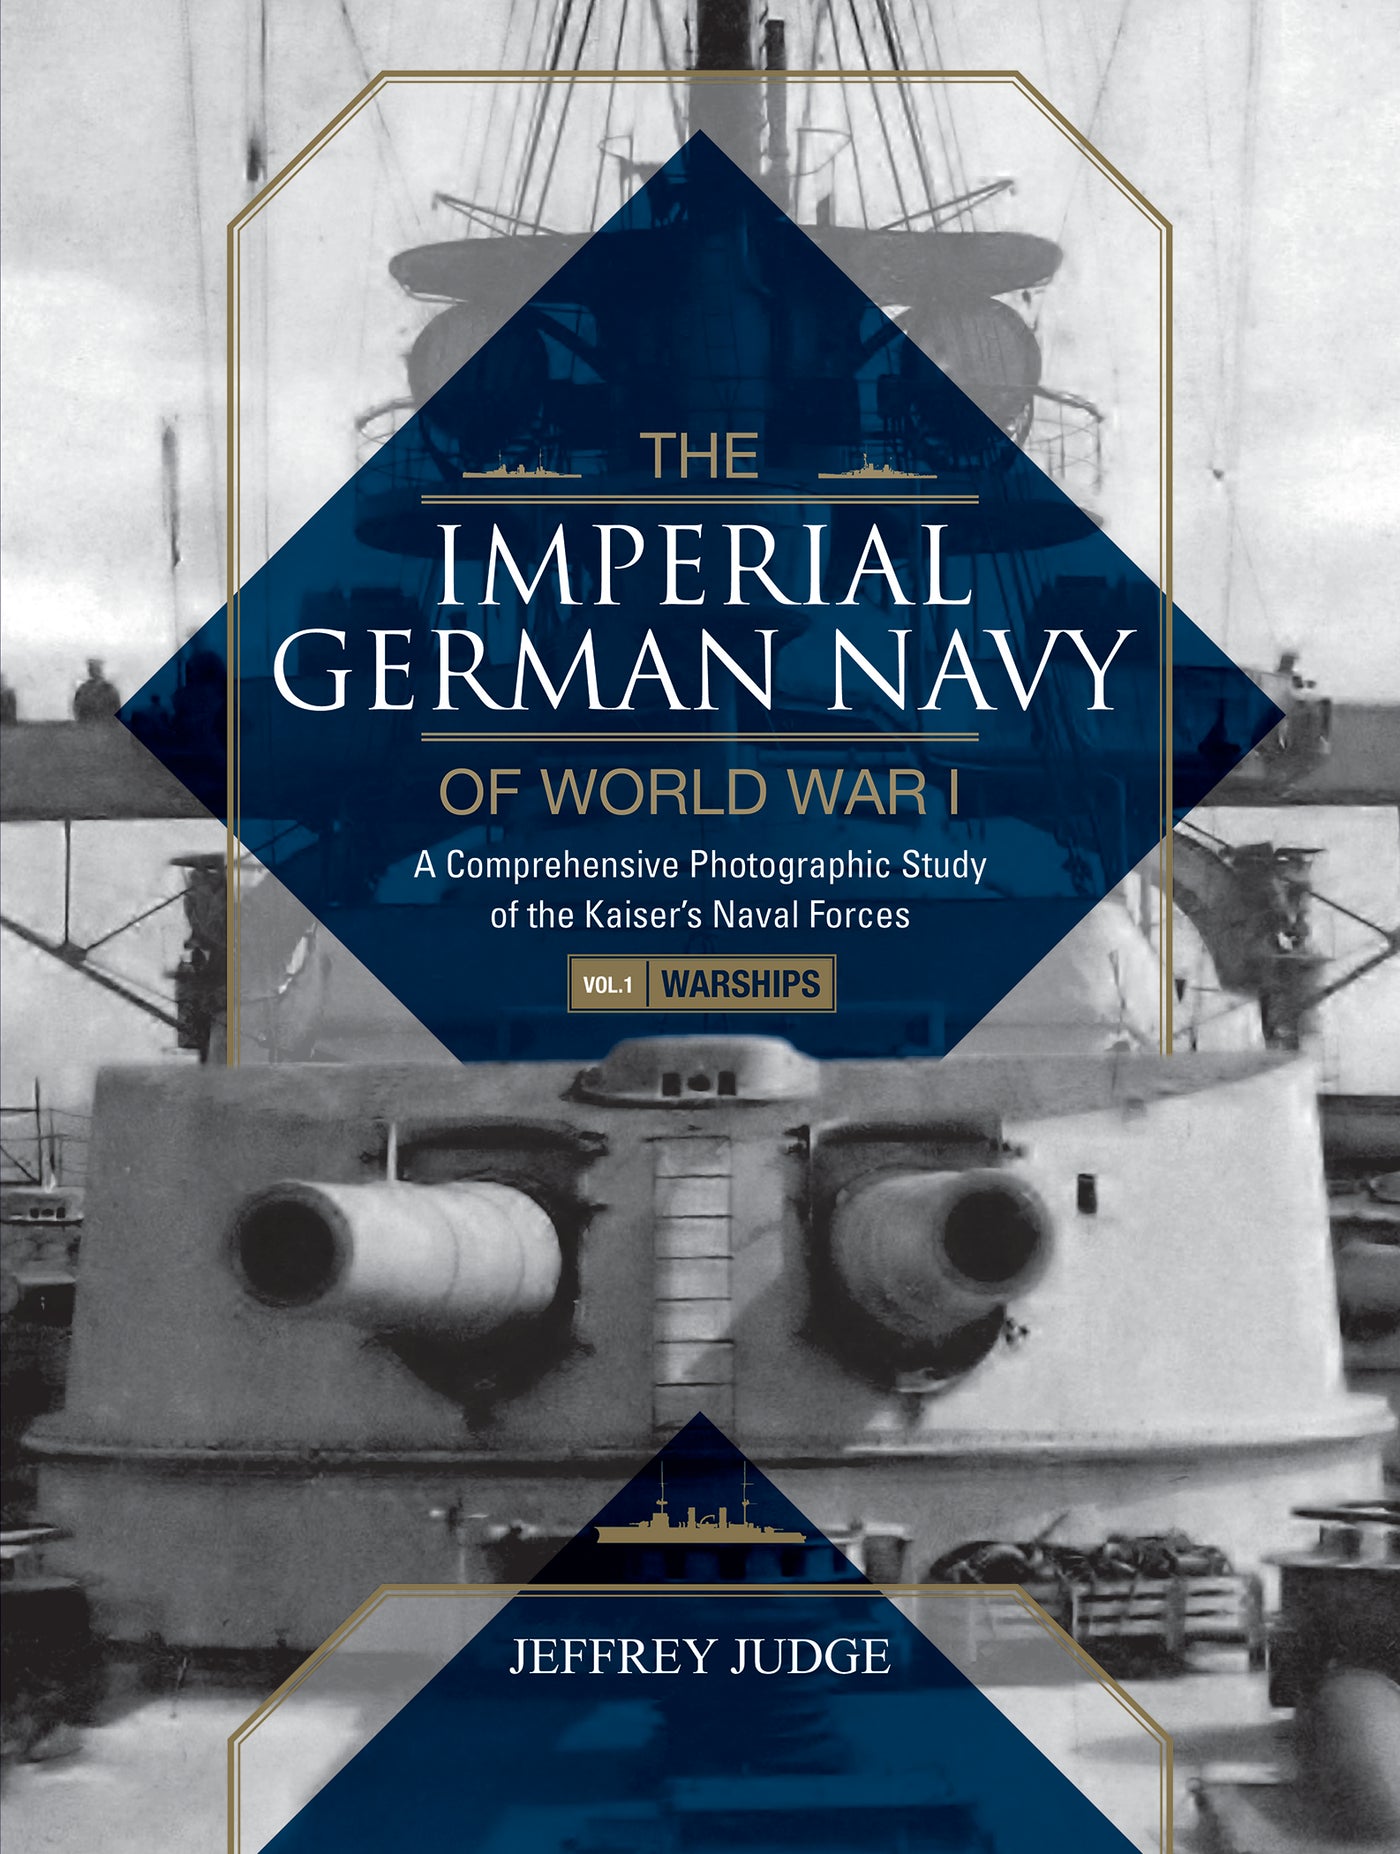 The Imperial German Navy of World War I: A Comprehensive Photographic Study of the Kaiser's Naval Forces